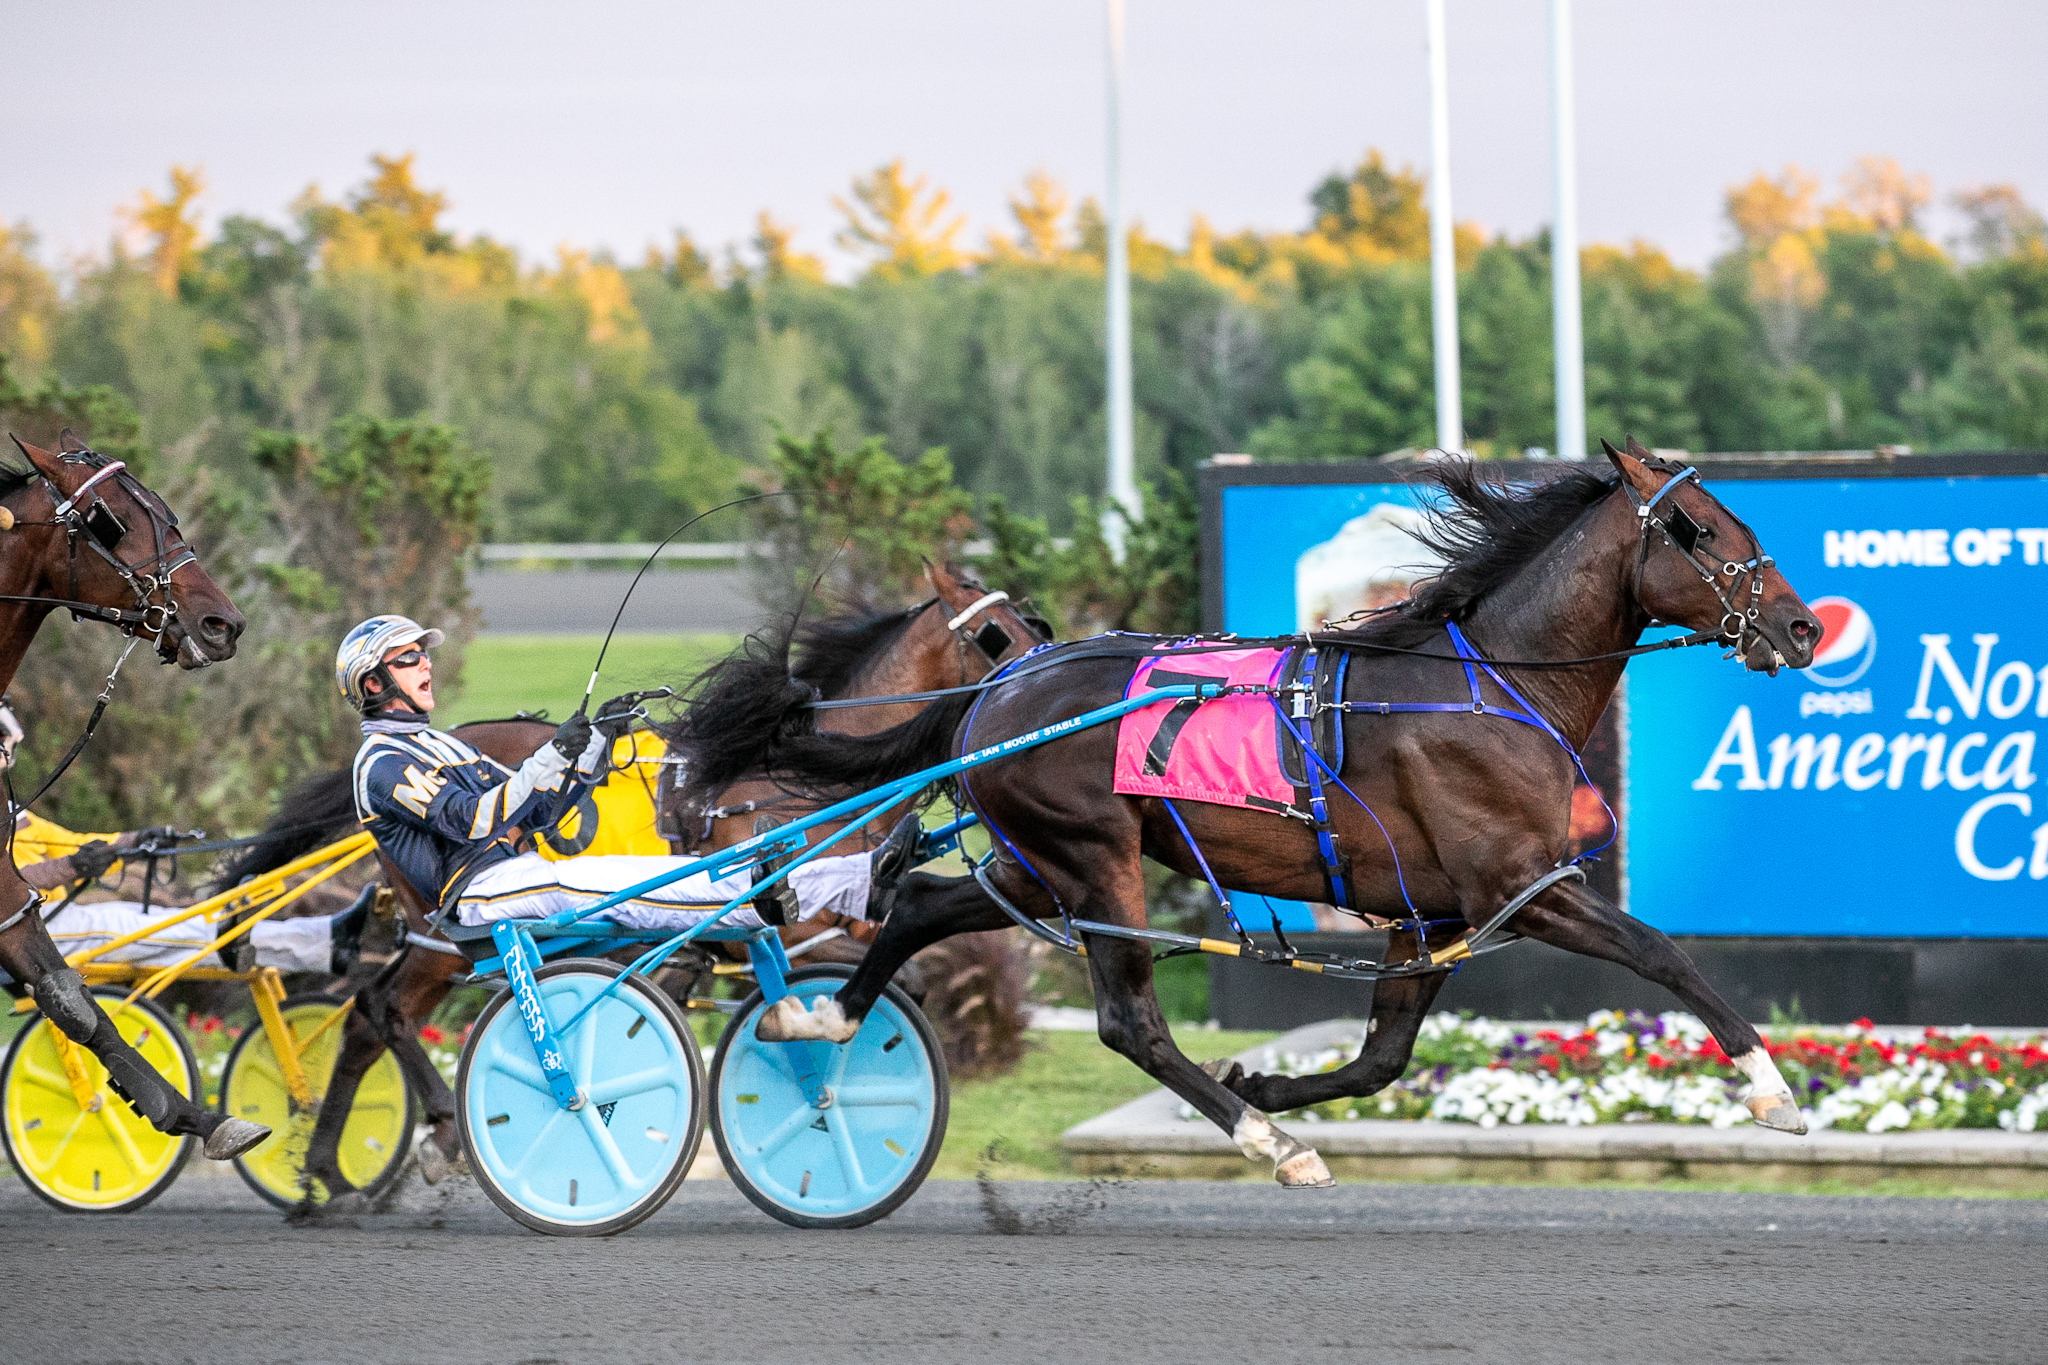 Standardbred Racing to Resume at Woodbine Mohawk Park This Friday